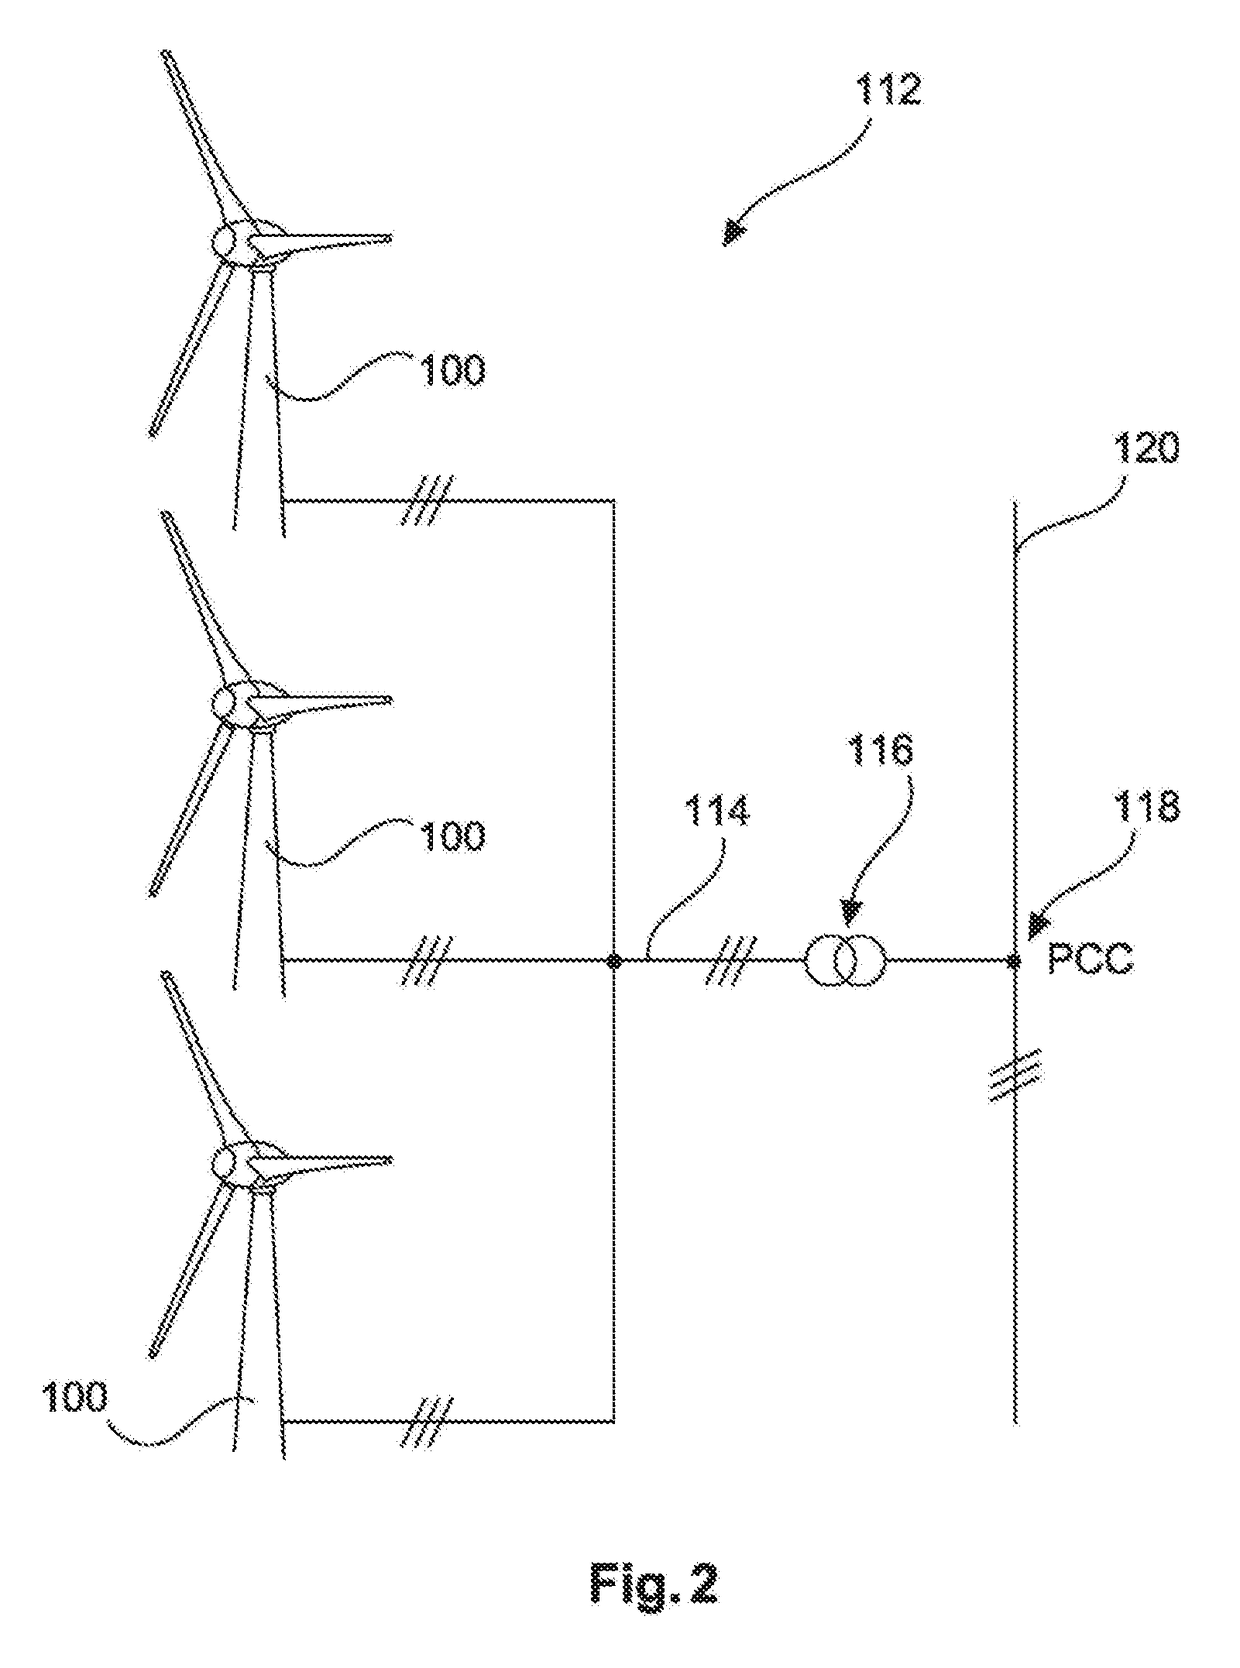 Method for operating a wind farm